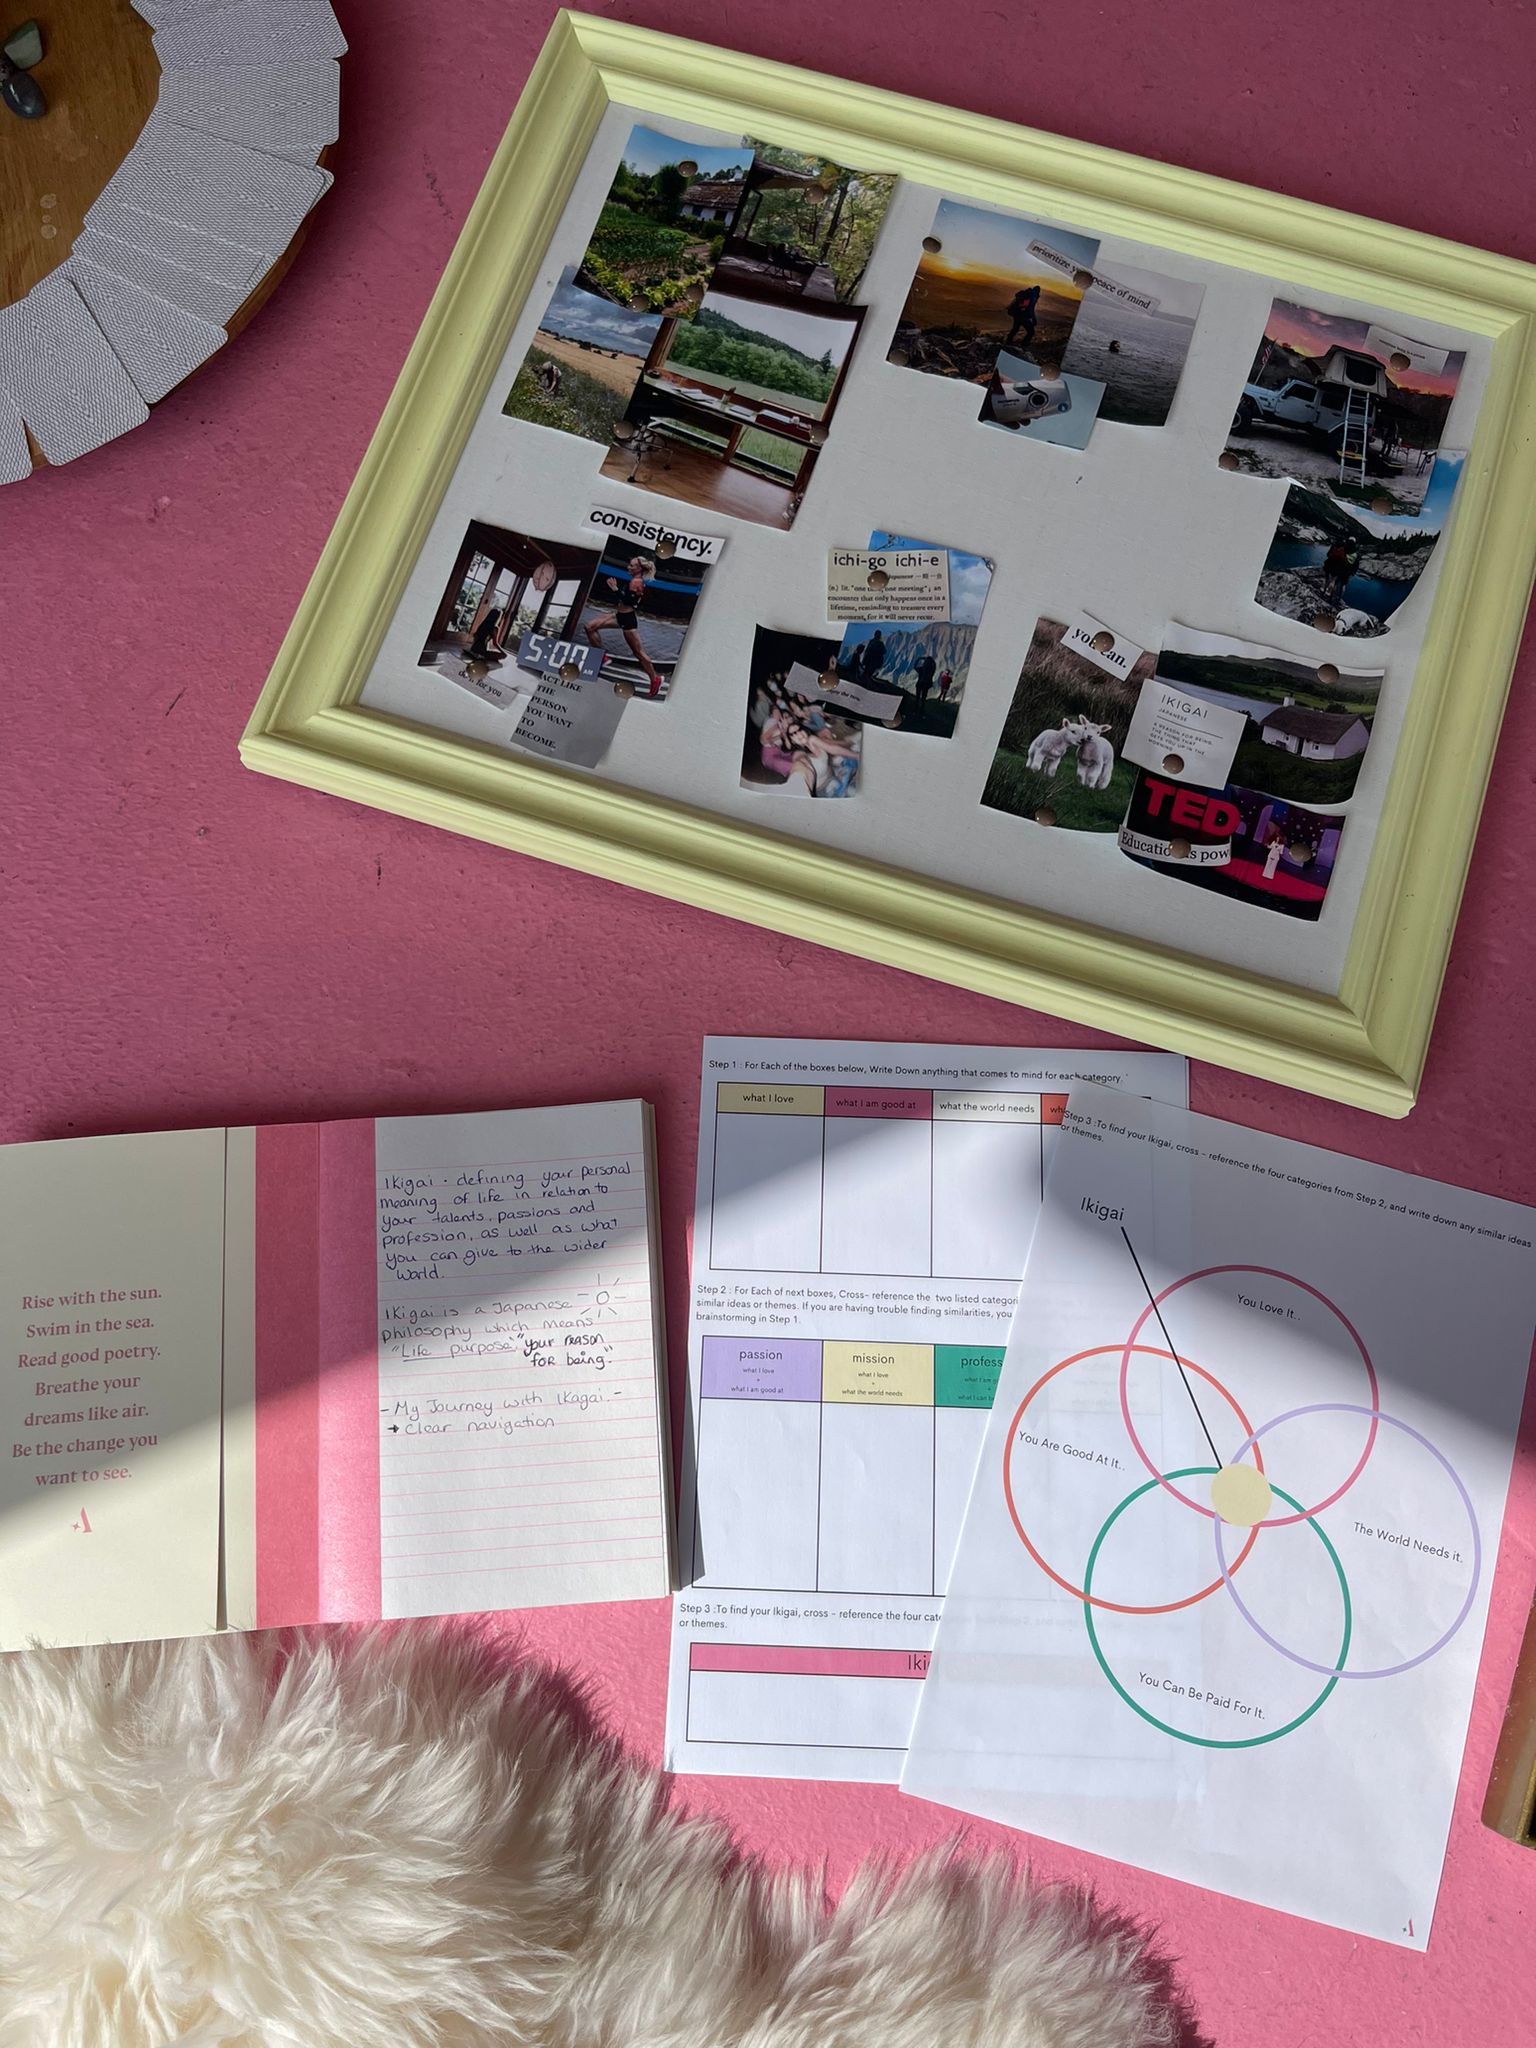 Reconnect | Cacao, Ikagai & Vision Board Workshop - May 5th